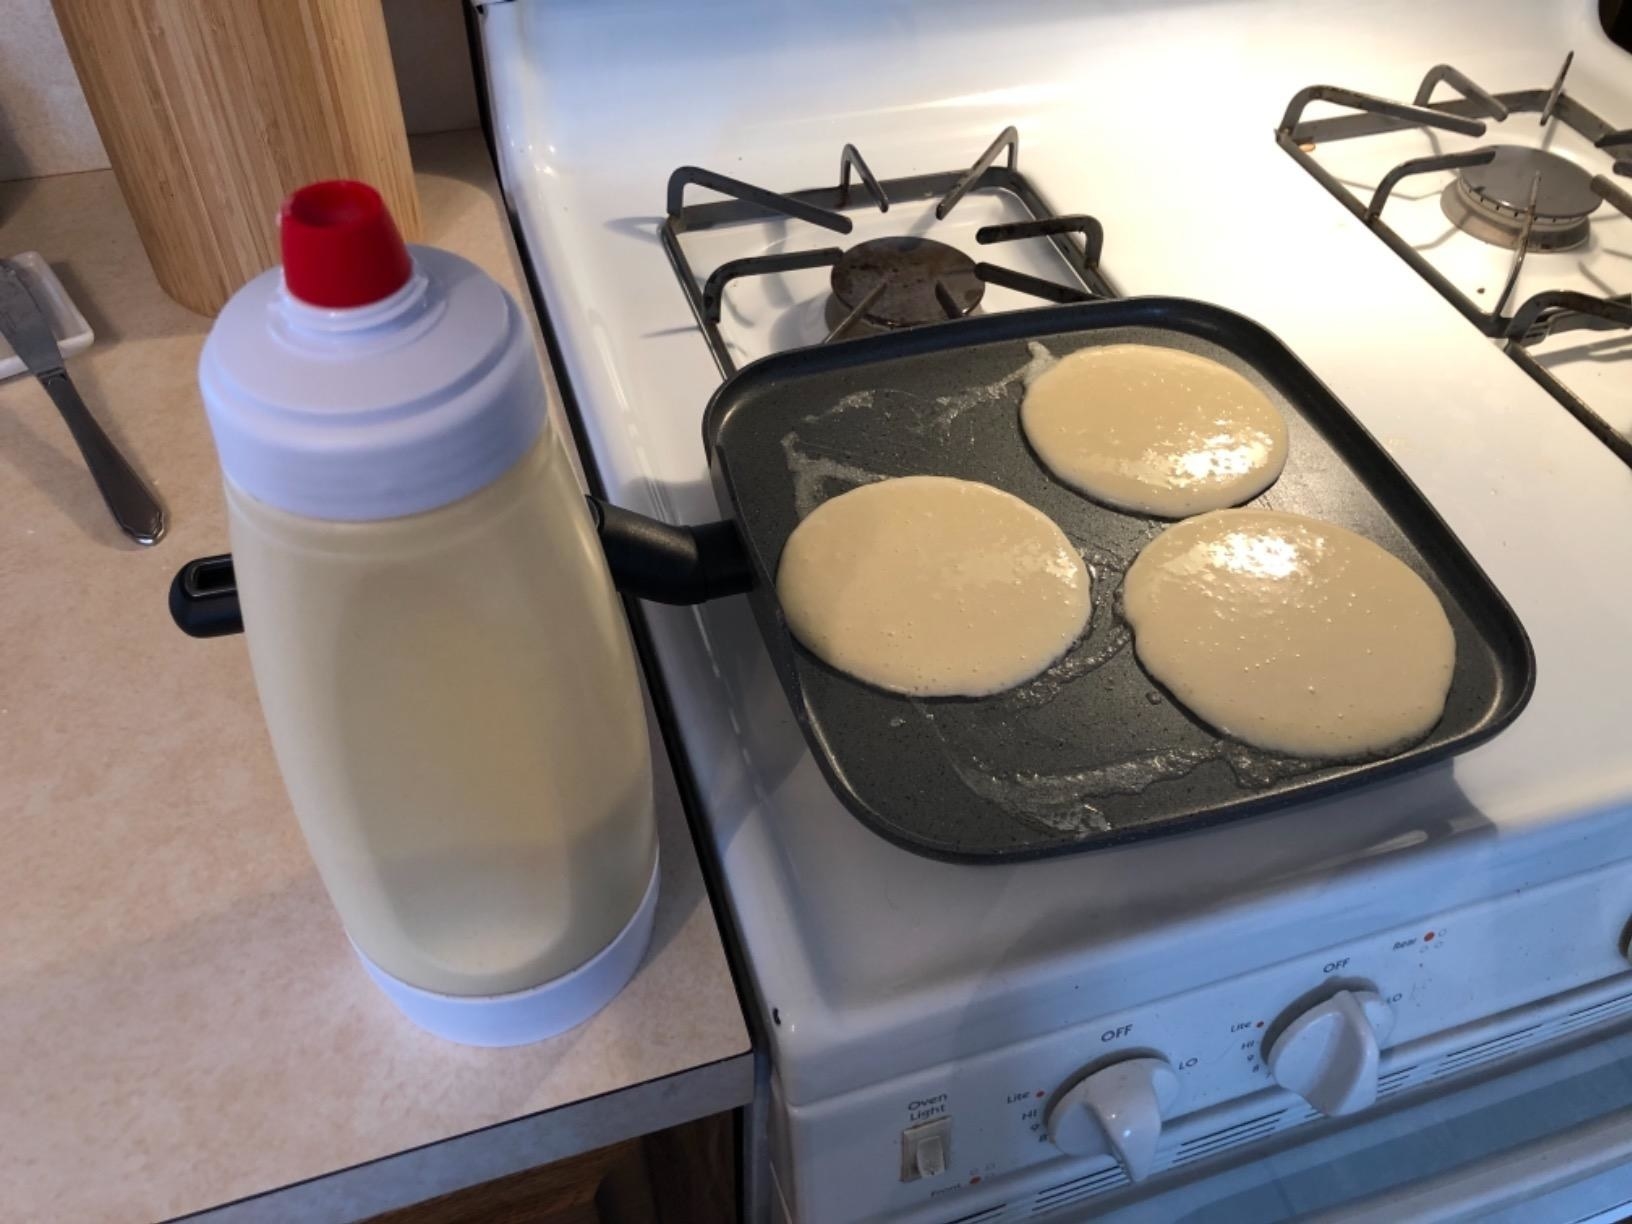 the pancake batter mixer and dispenser with batter inside next to a skillet with freshly poured batter cooking into pancakes on the stove